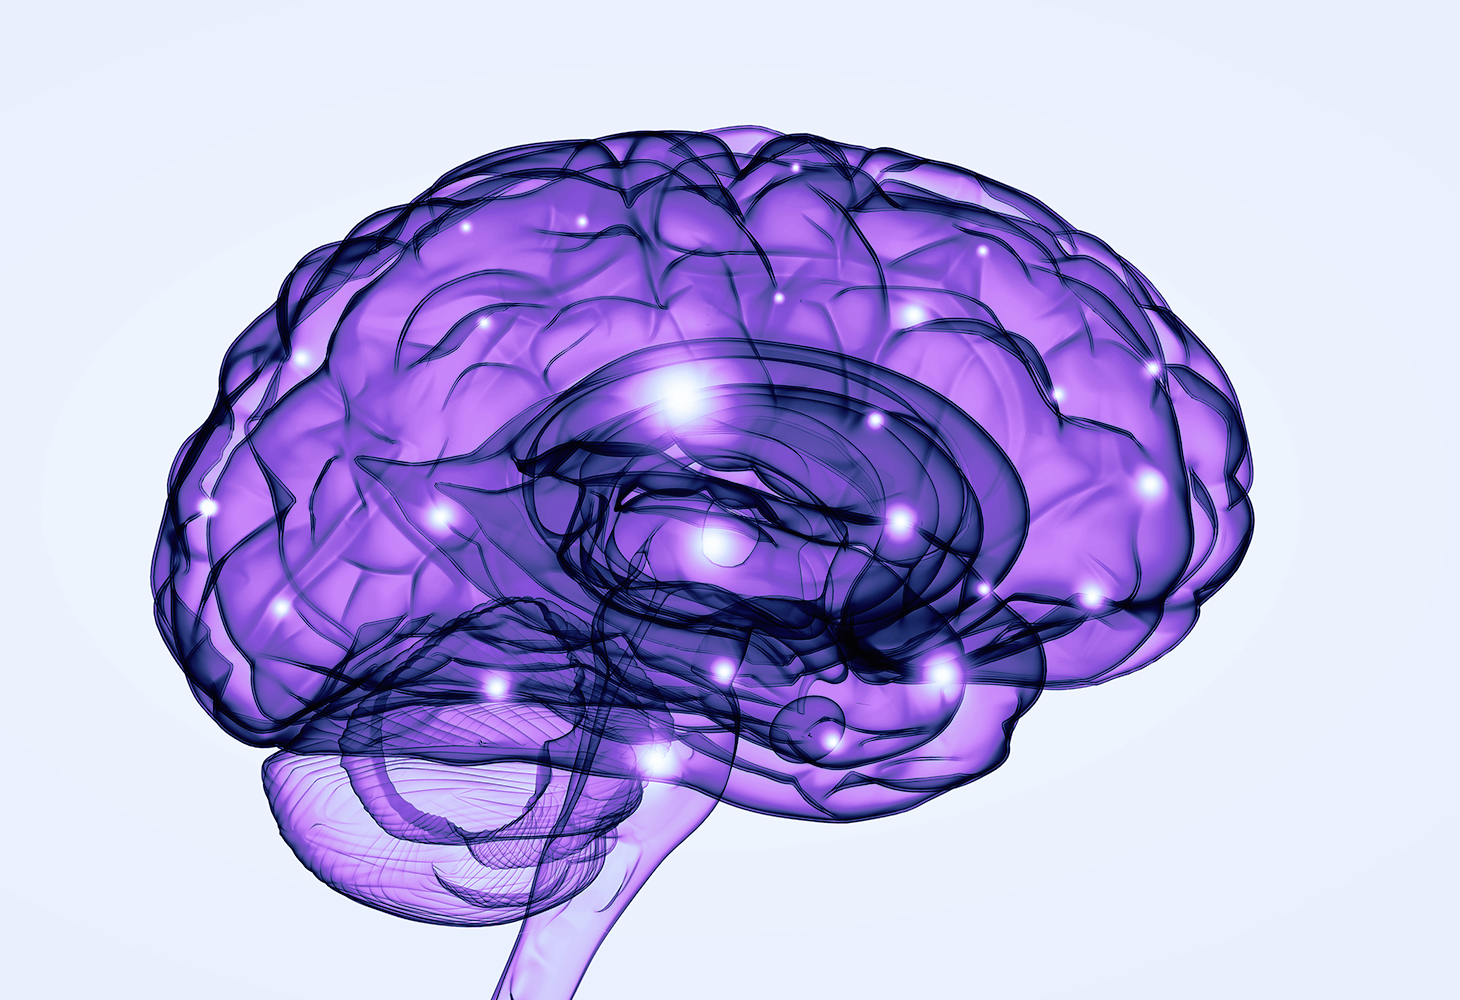 3D illustration of a brain with areas lit to show activity